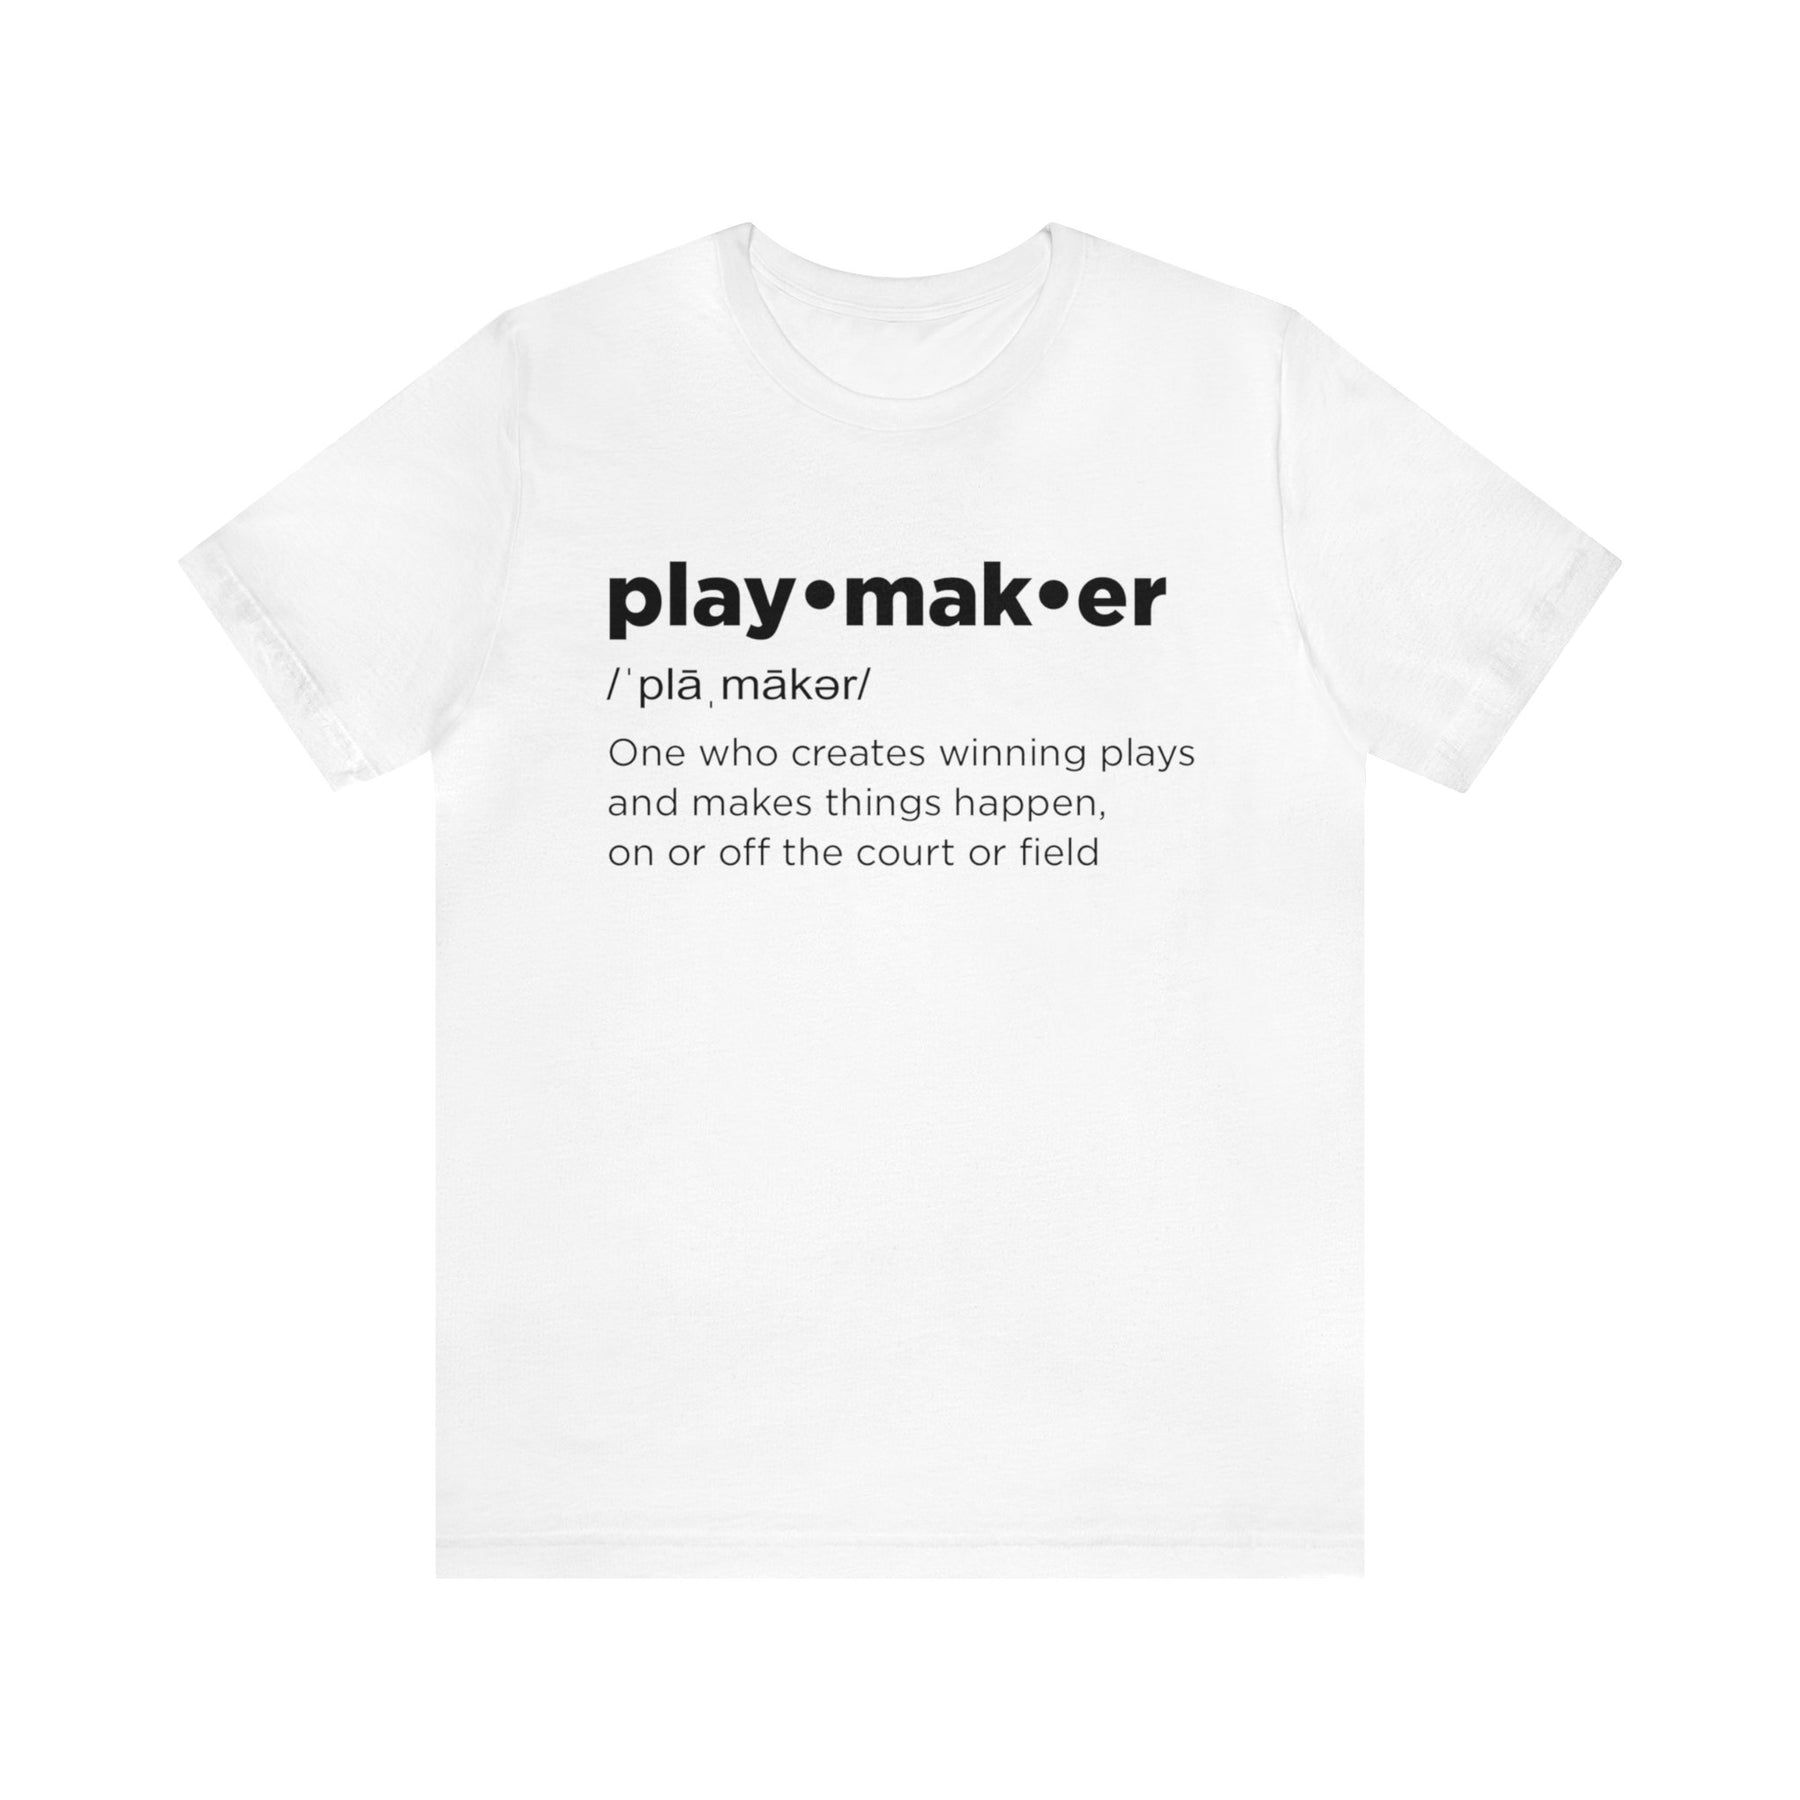 Playmaker "Definition" Tee